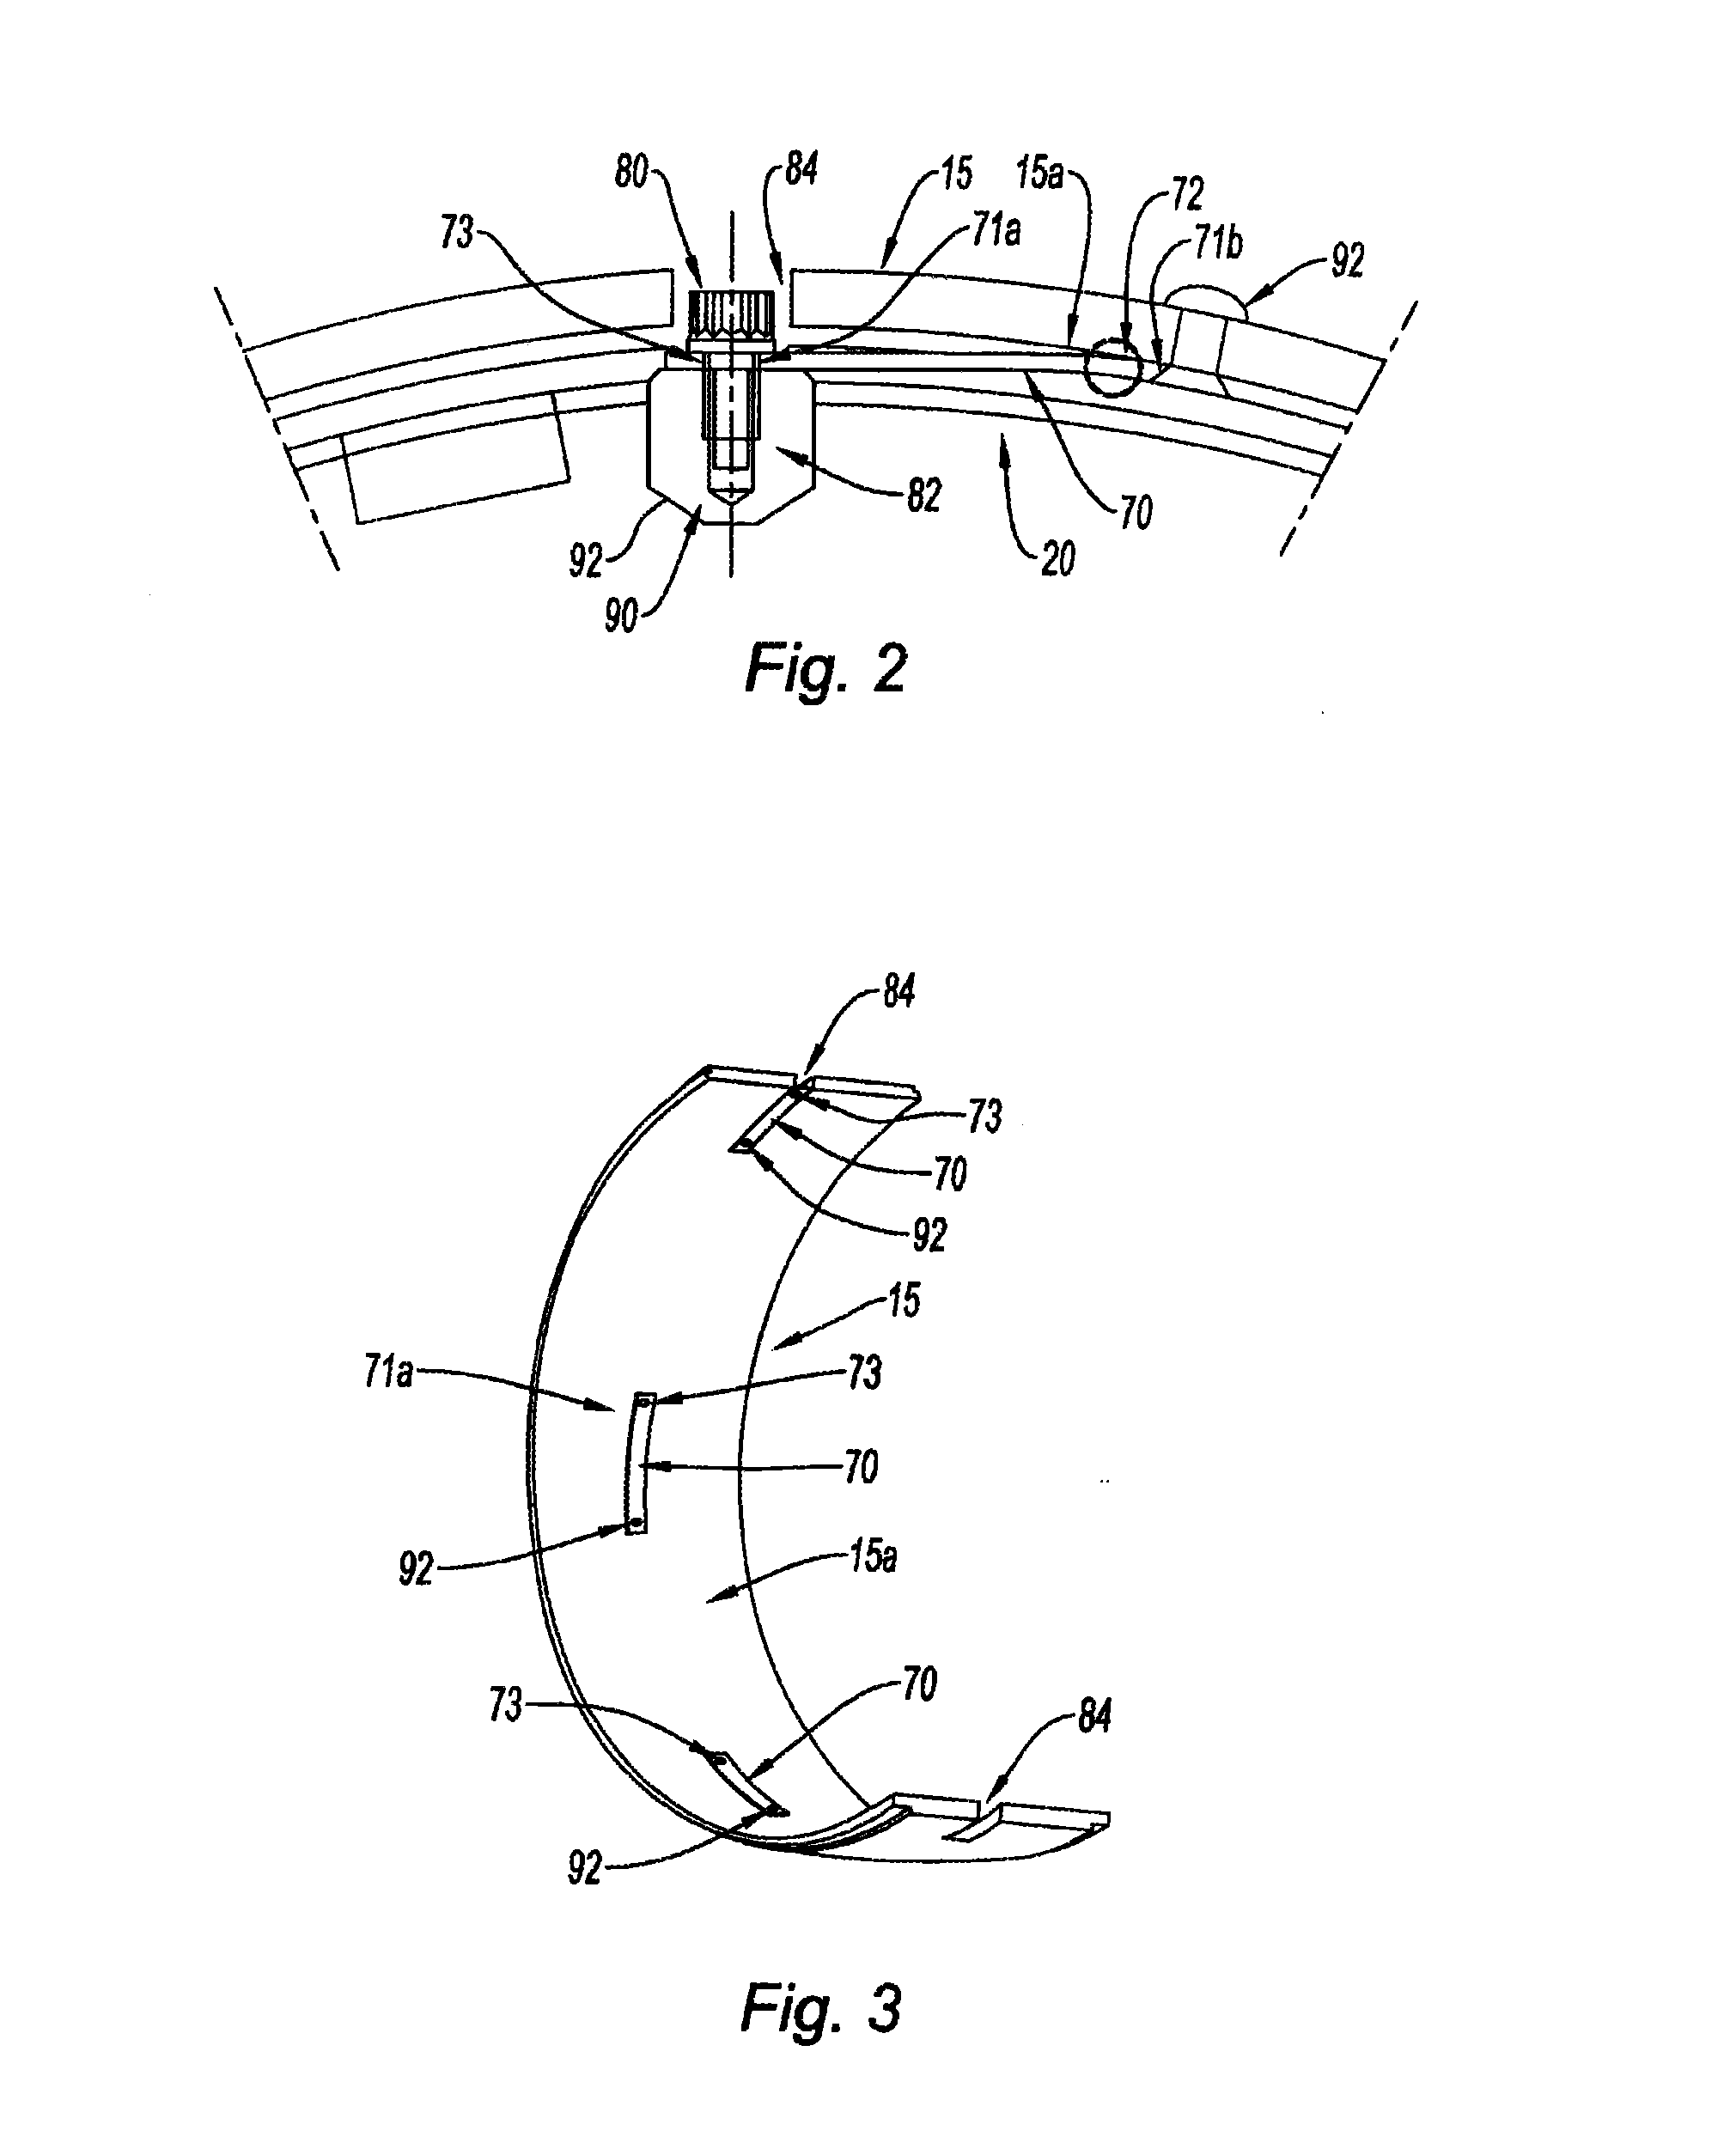 Method for mounting shielding on a turbine casing, and mounting assembly for implementing same